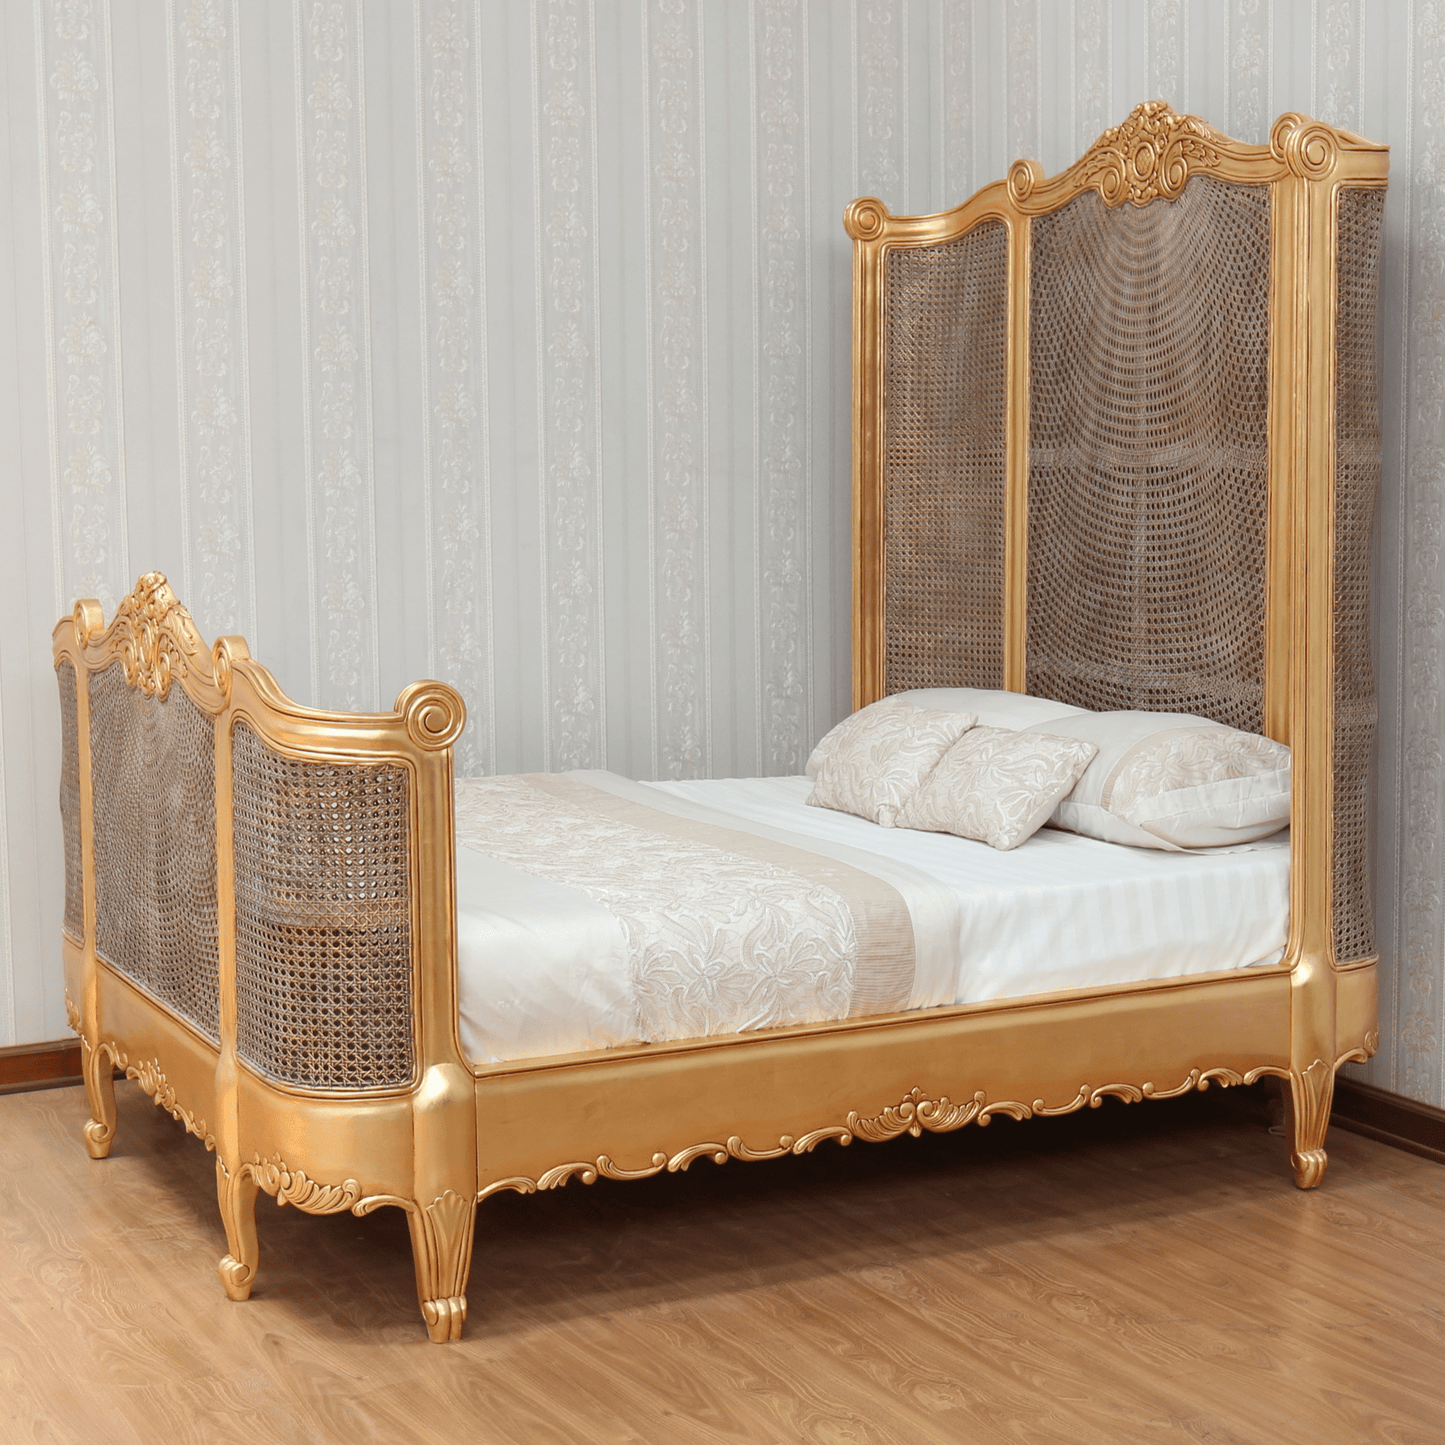 French Carved Rattan Bed with High Headboard - Antique Gold Leaf